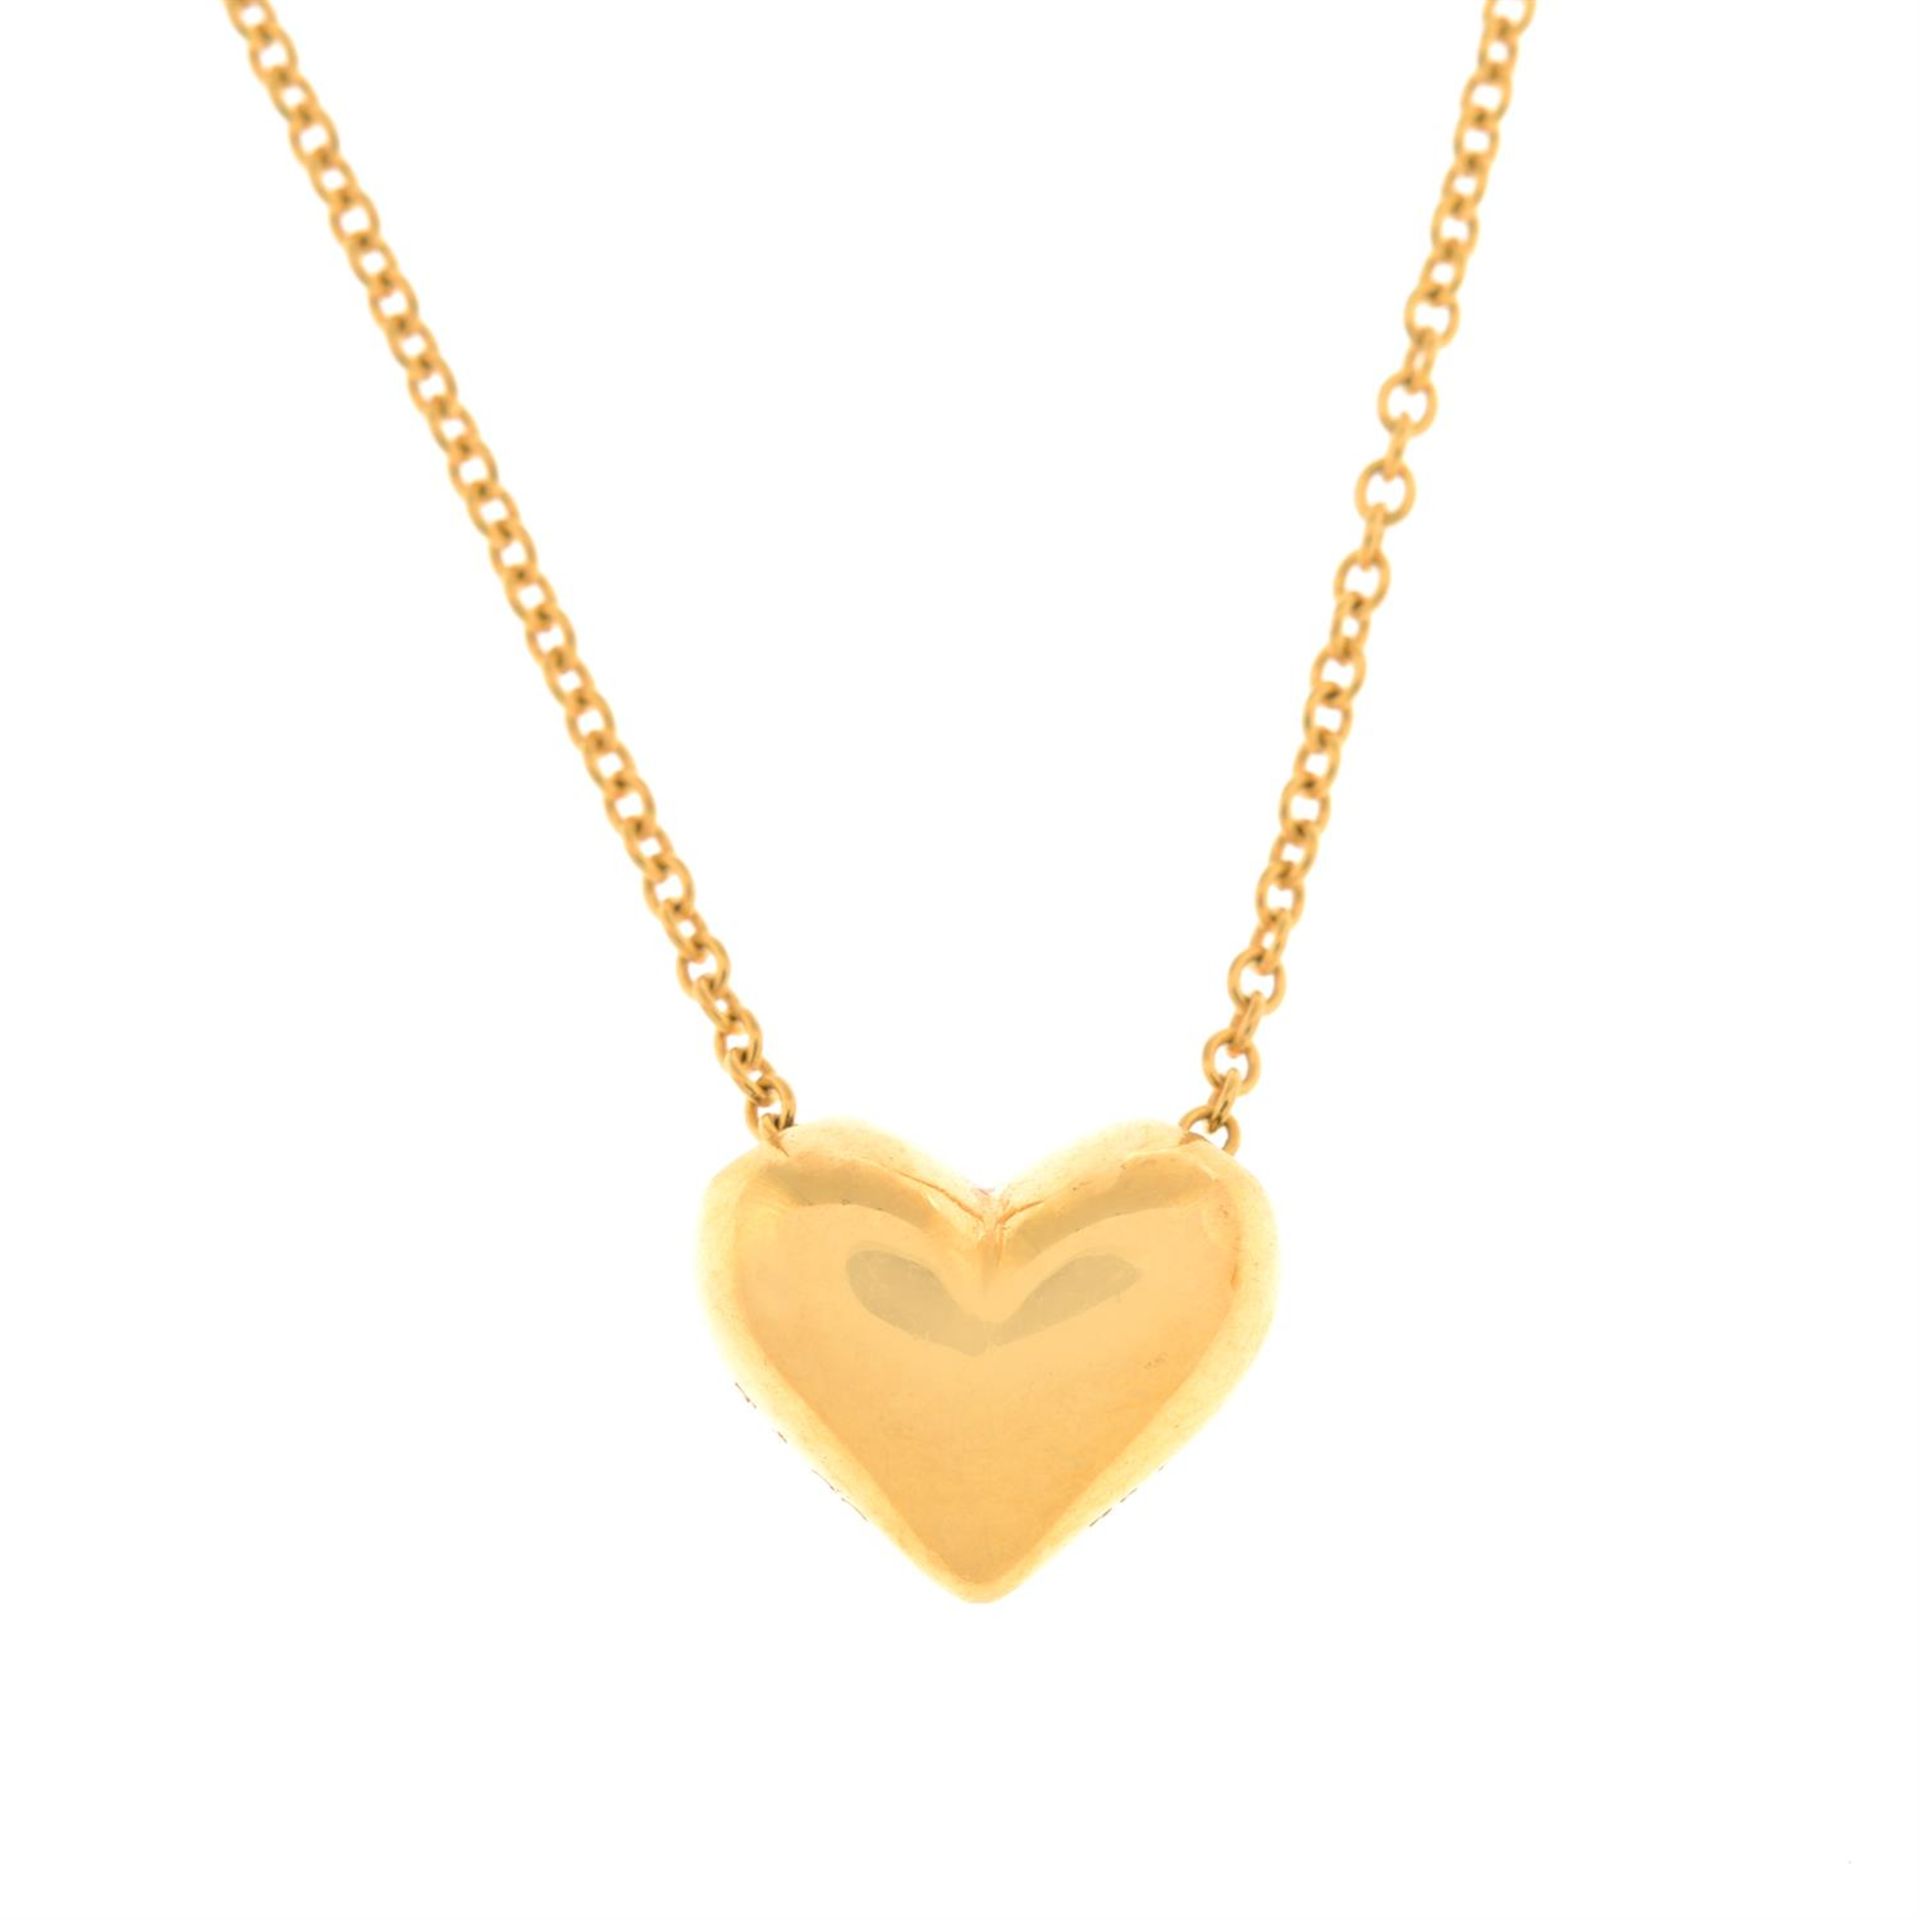 A heart pendant, with chain, by Tiffany & Co.